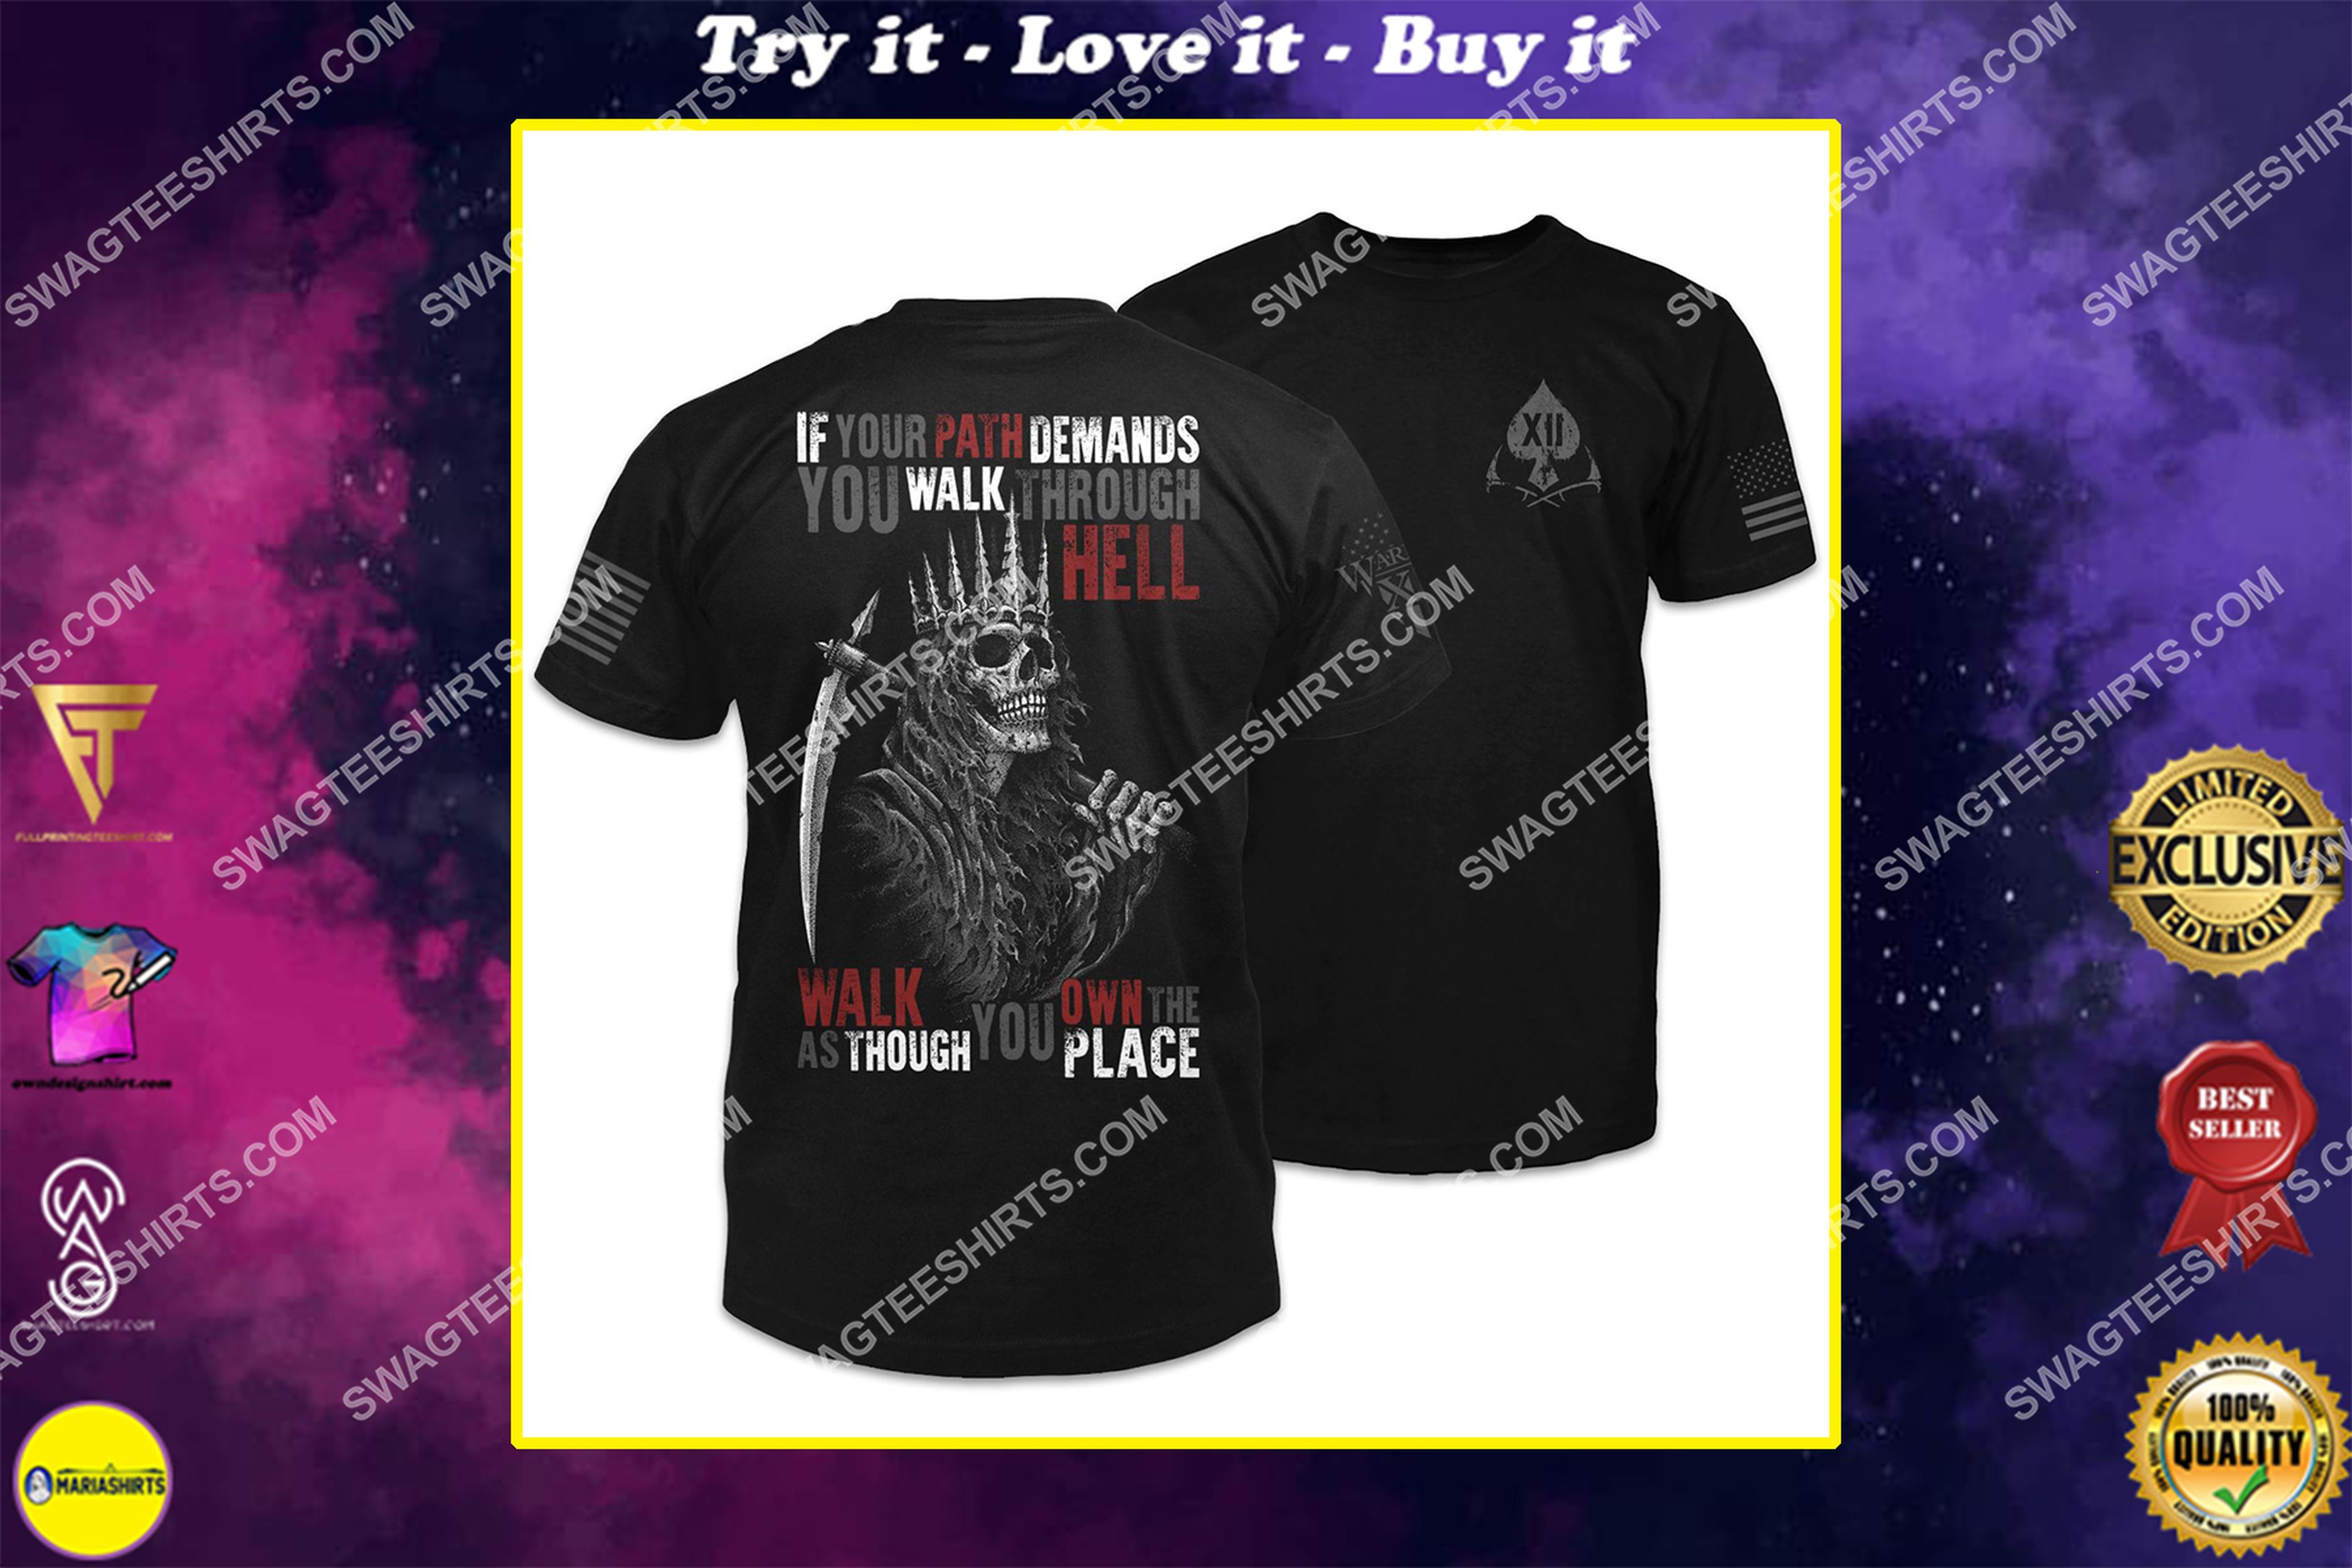 [special edition] if your path demands you walk through hell walk as though you own the place skull shirt – maria